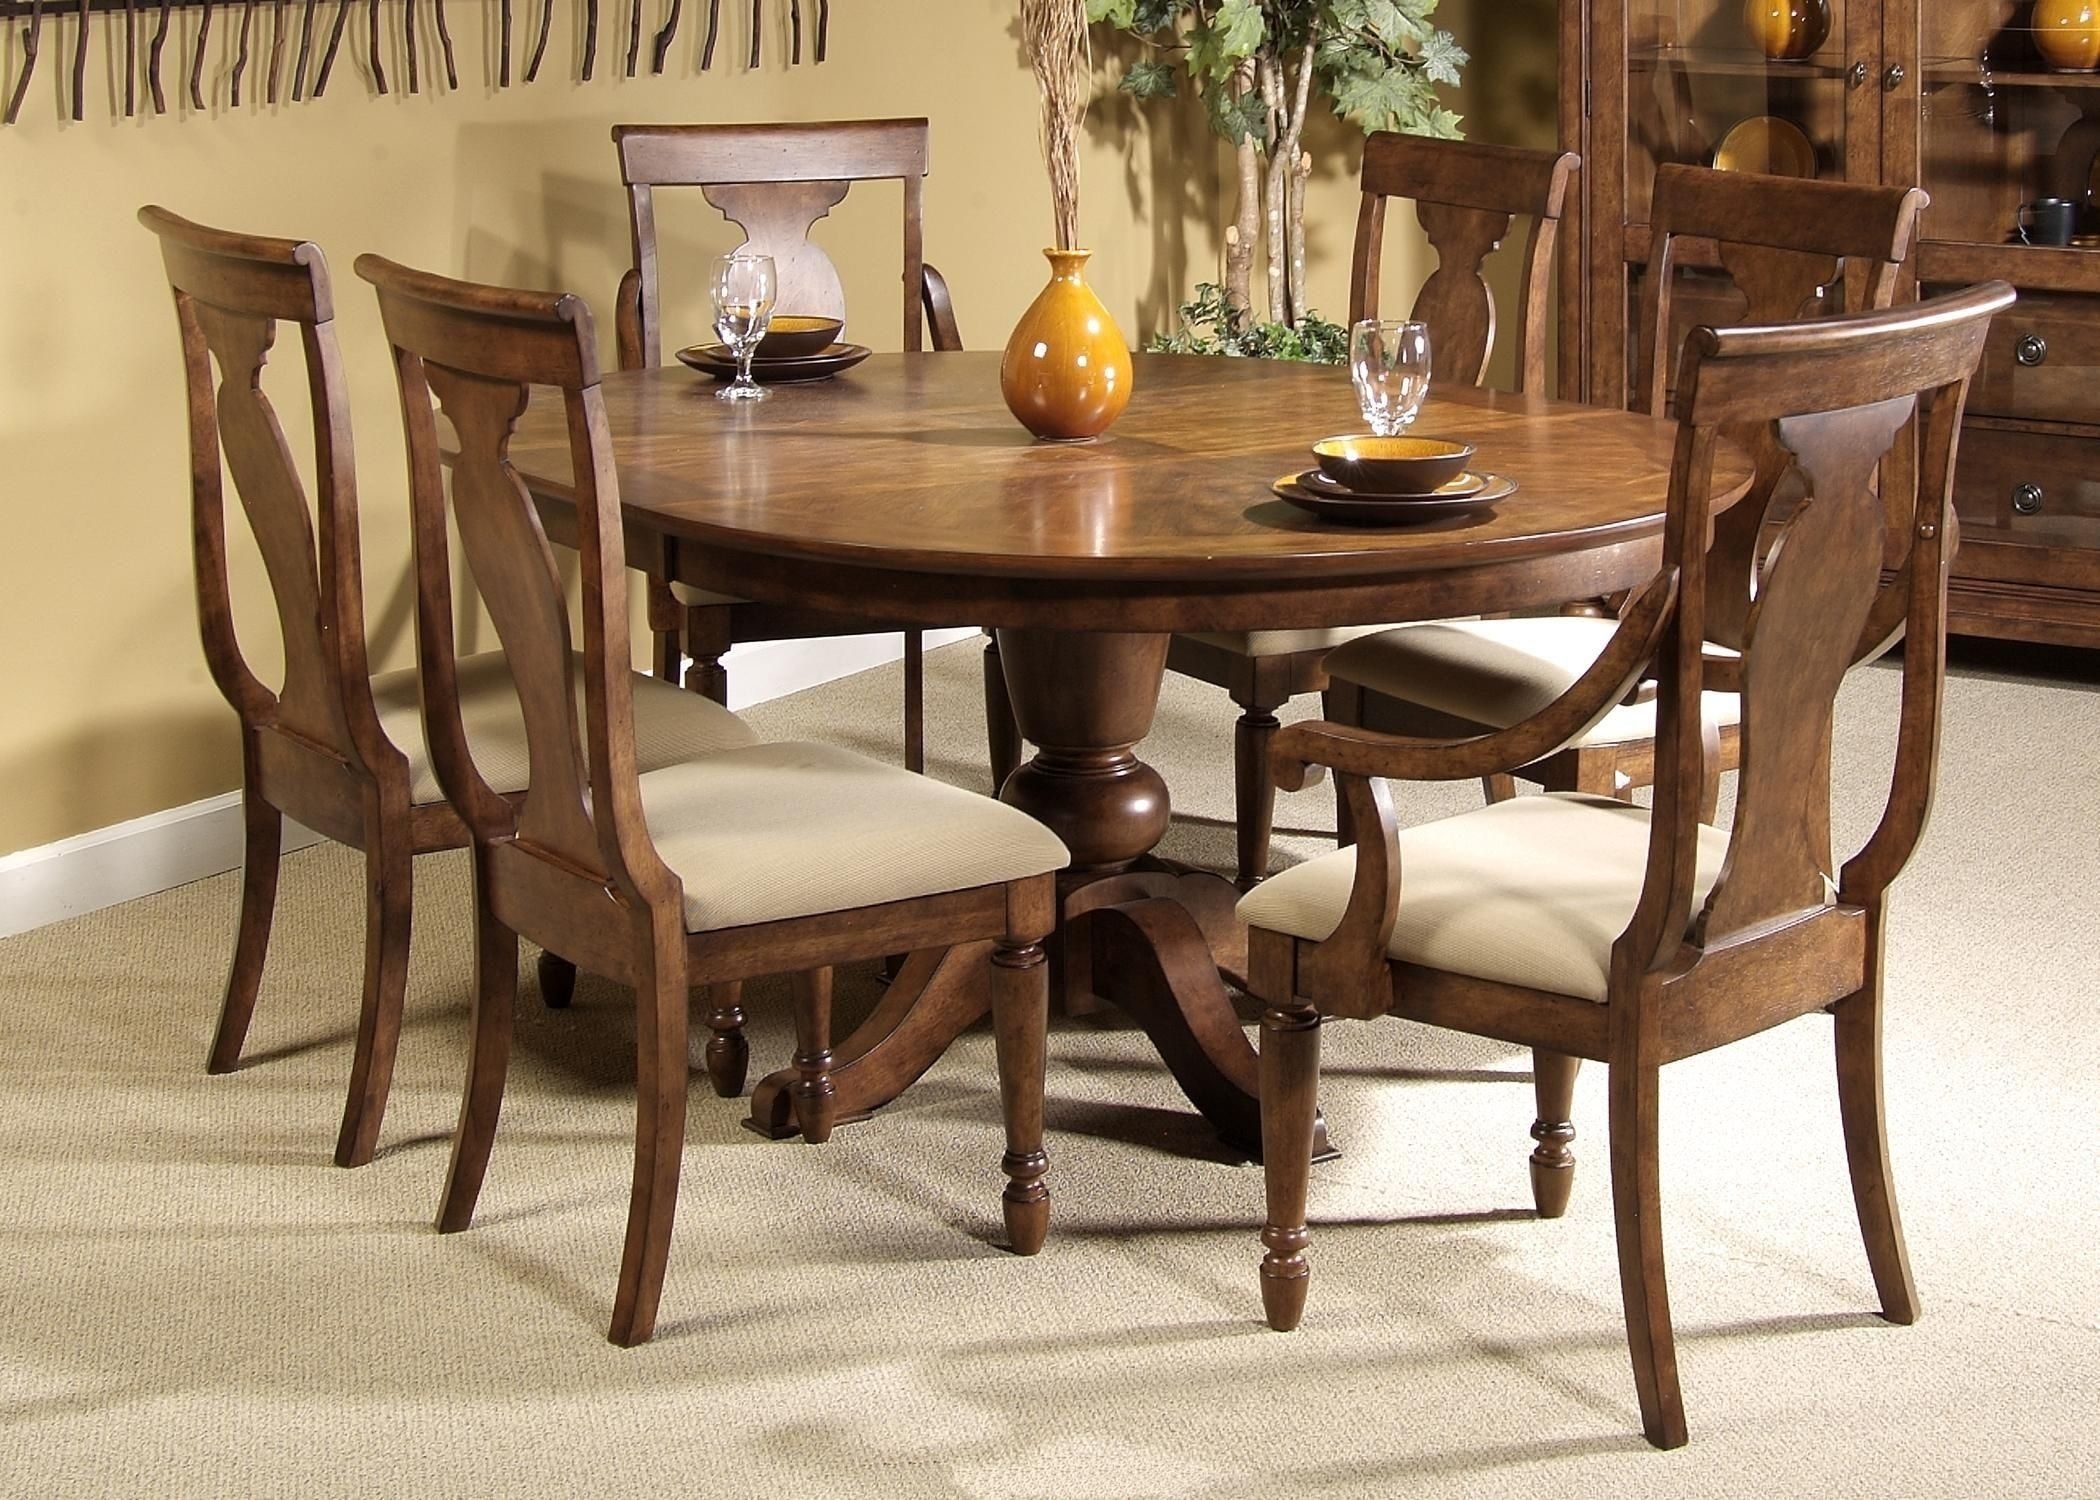 Round Dining Table For 6 Visualhunt, Round Dining Room Table Seats 6 8